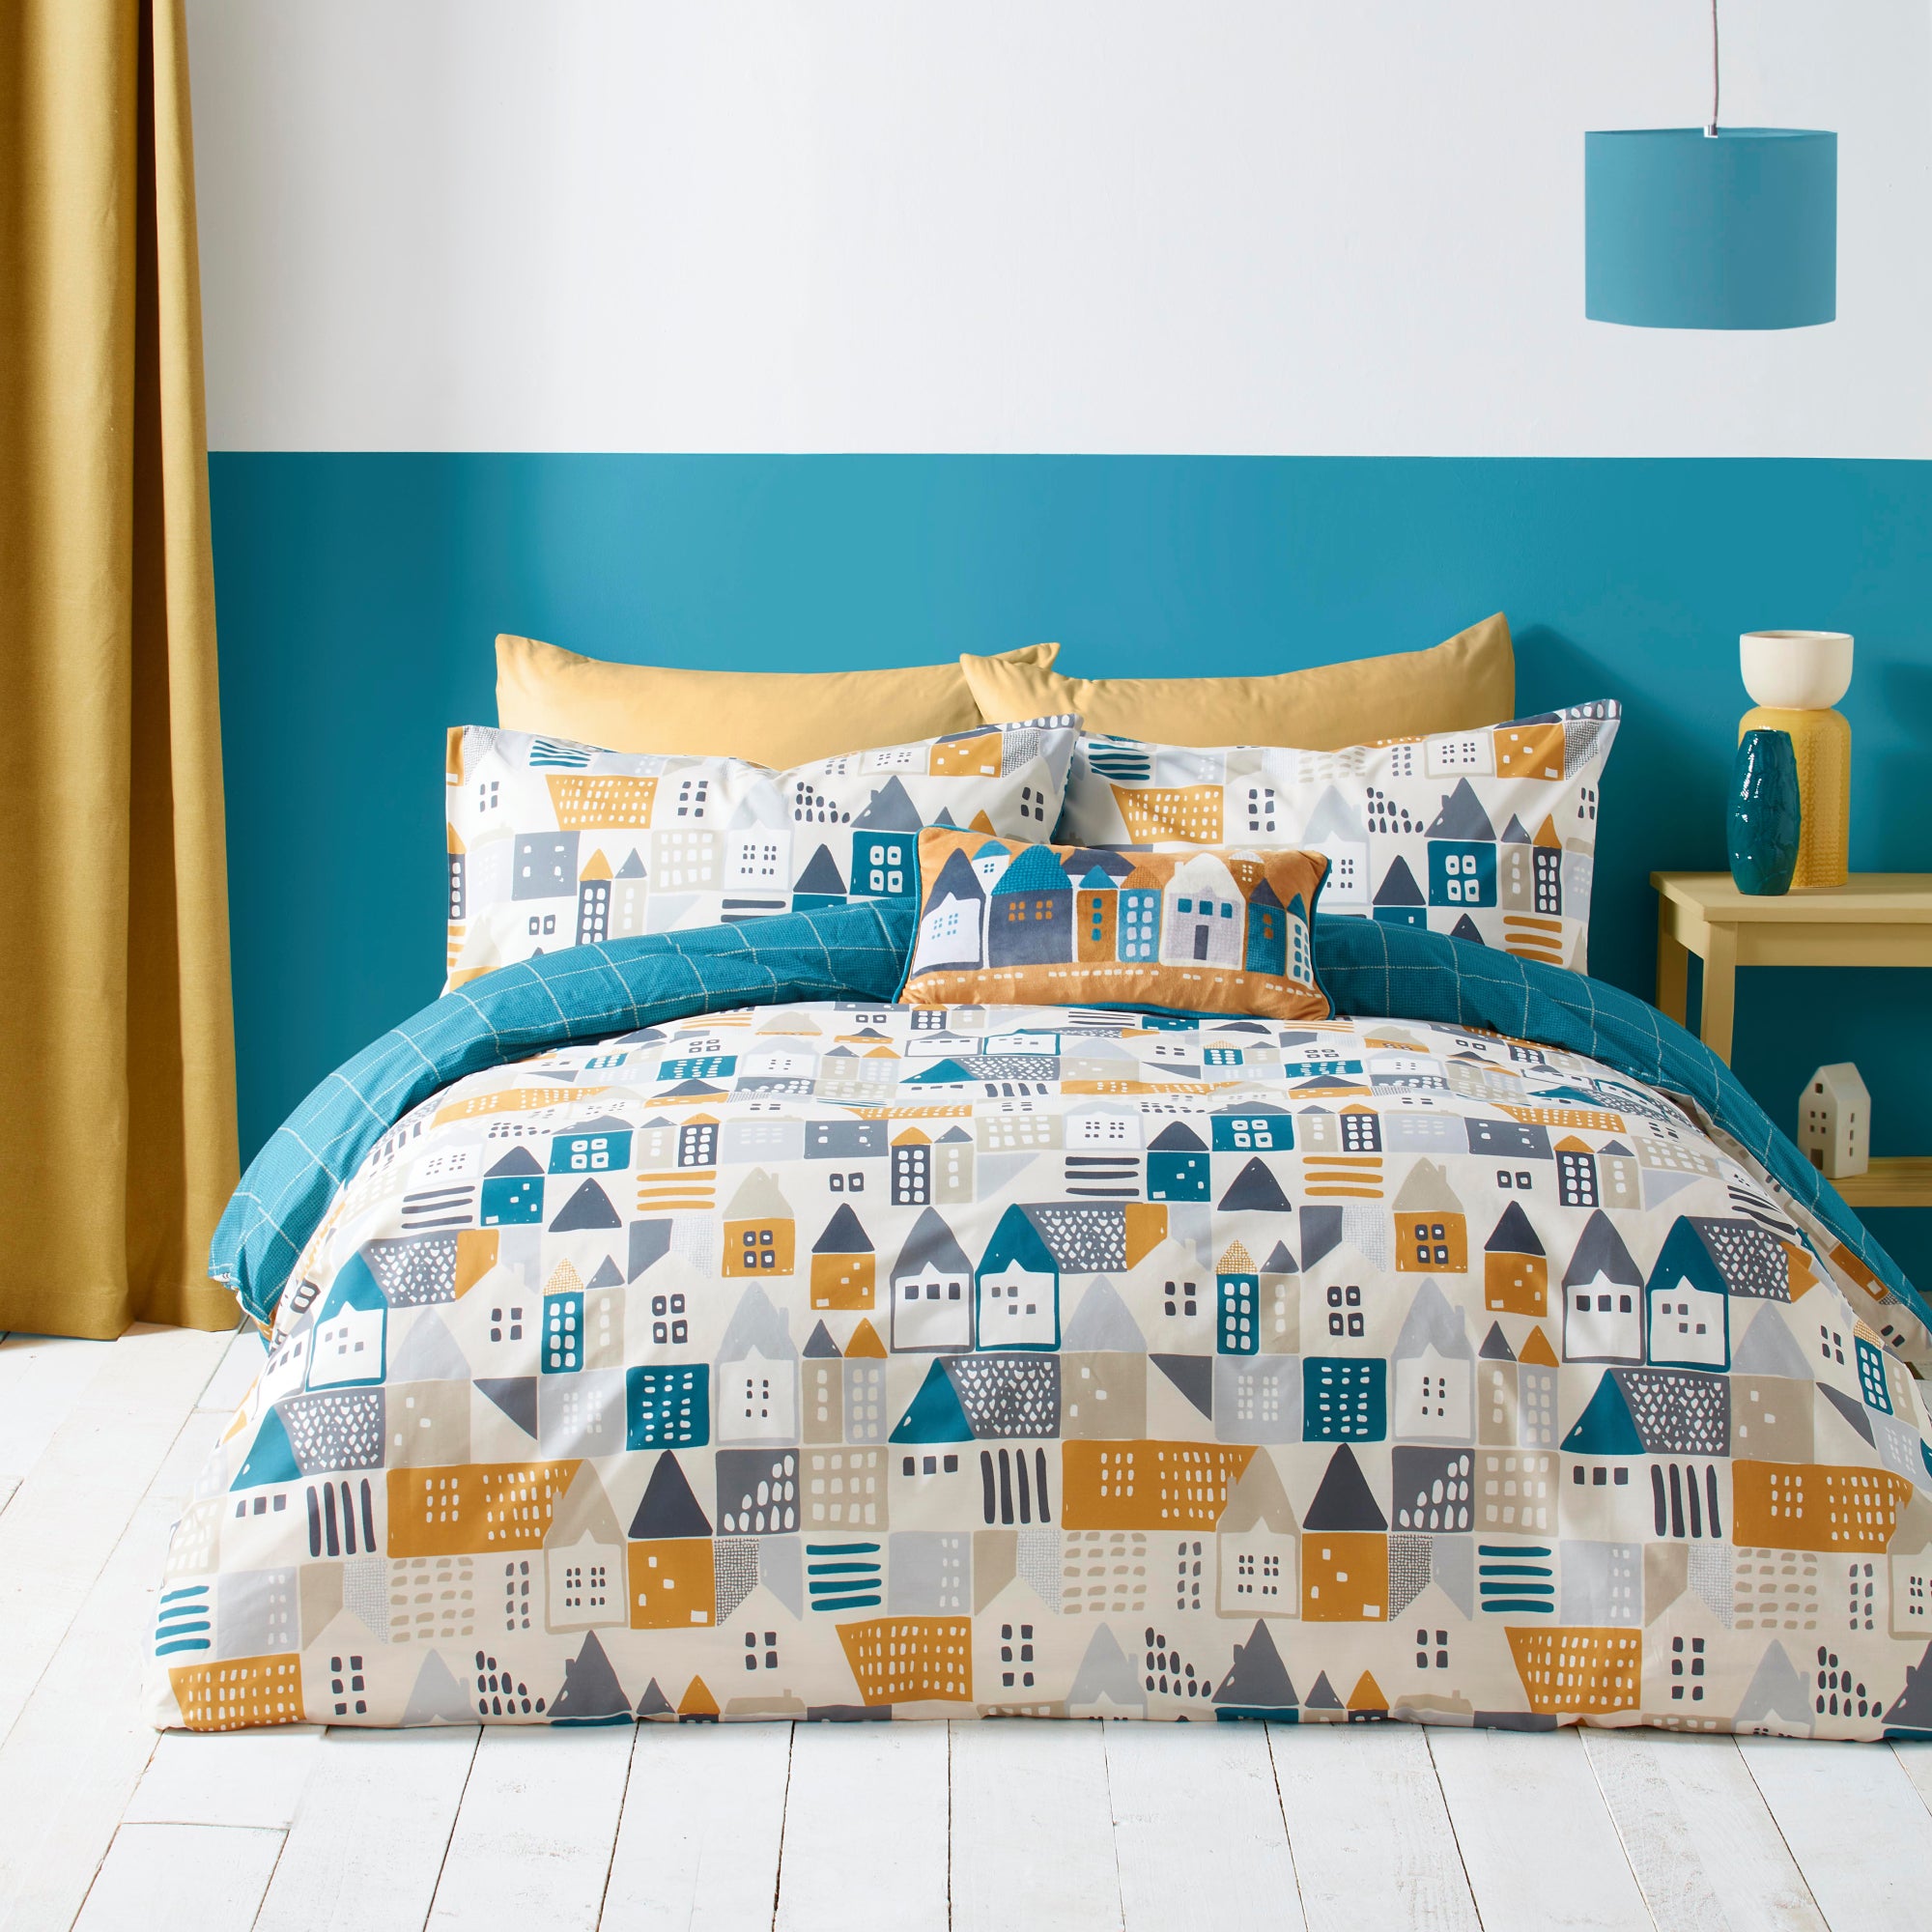 Duvet Cover Set Nordica by Fusion in Teal